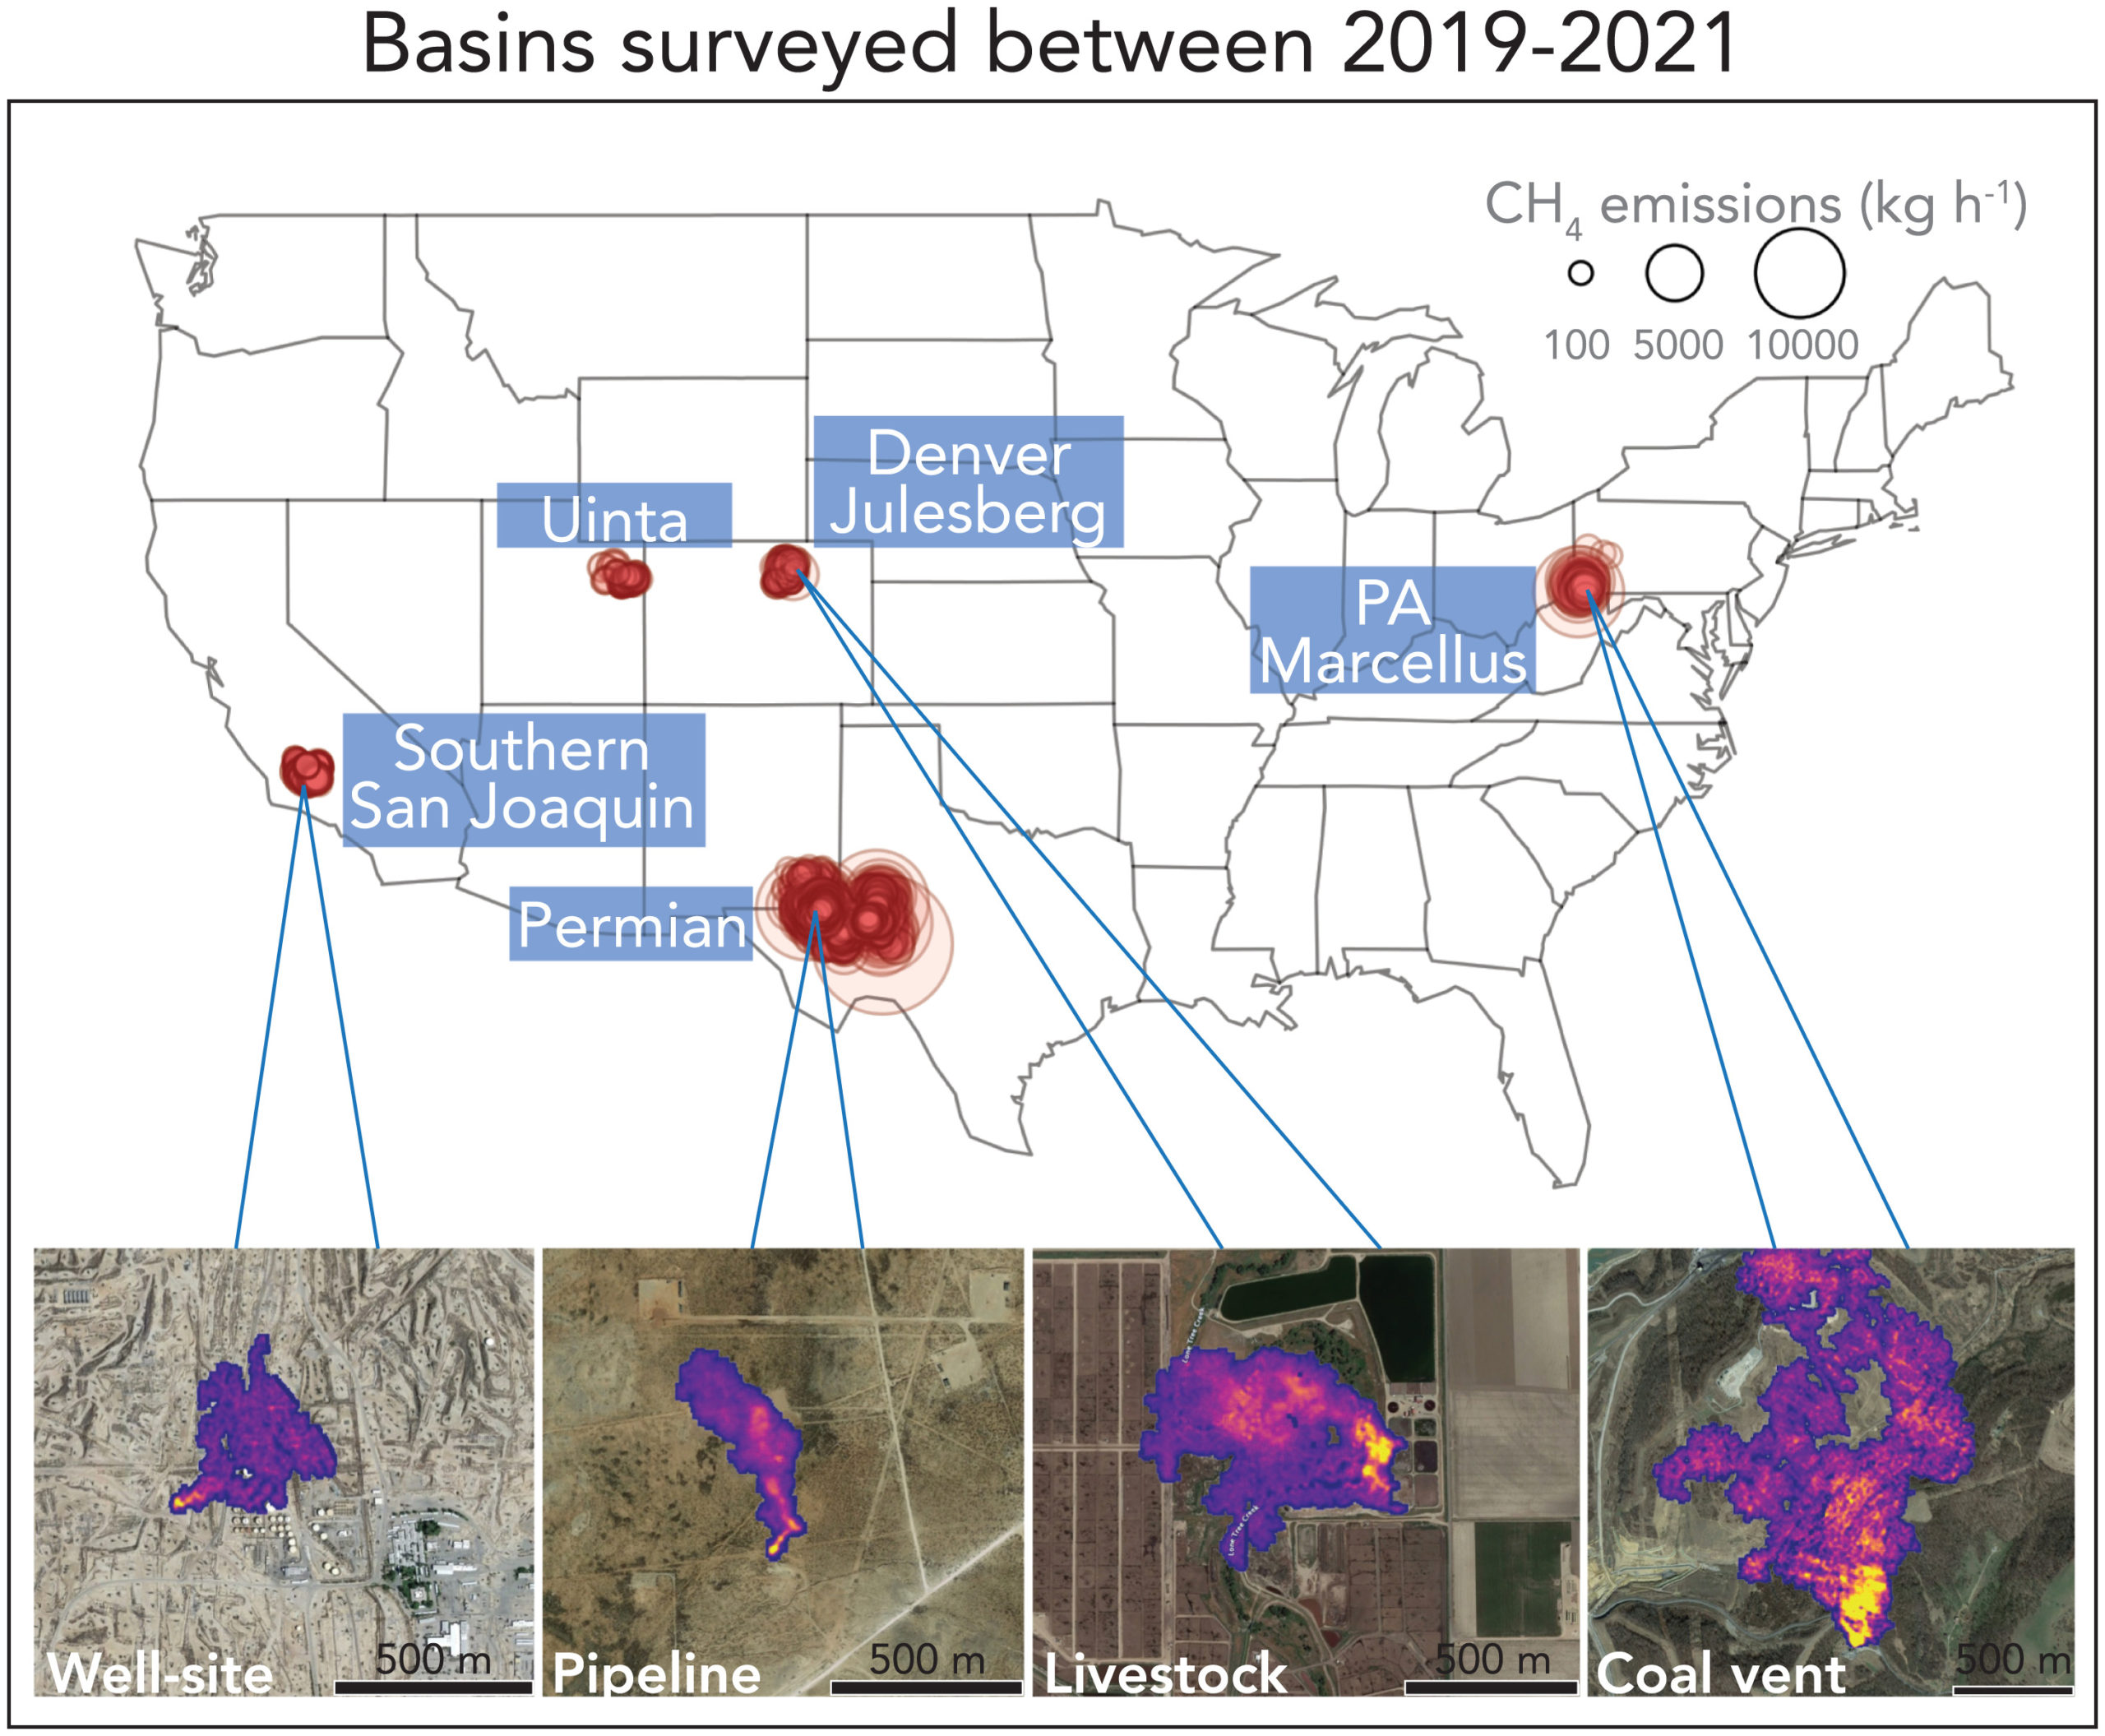 Major basins surveyed between 2019 and 2021 with either the GAO or AVIRIS-NG airborne imaging spectrometers. Bottom panels show representative CH4 point source plumes from various emission sources, including a well site, pipeline, manure management/livestock, and a coal vent. Graphic: Cusworth, et al., 2022 / PNAS